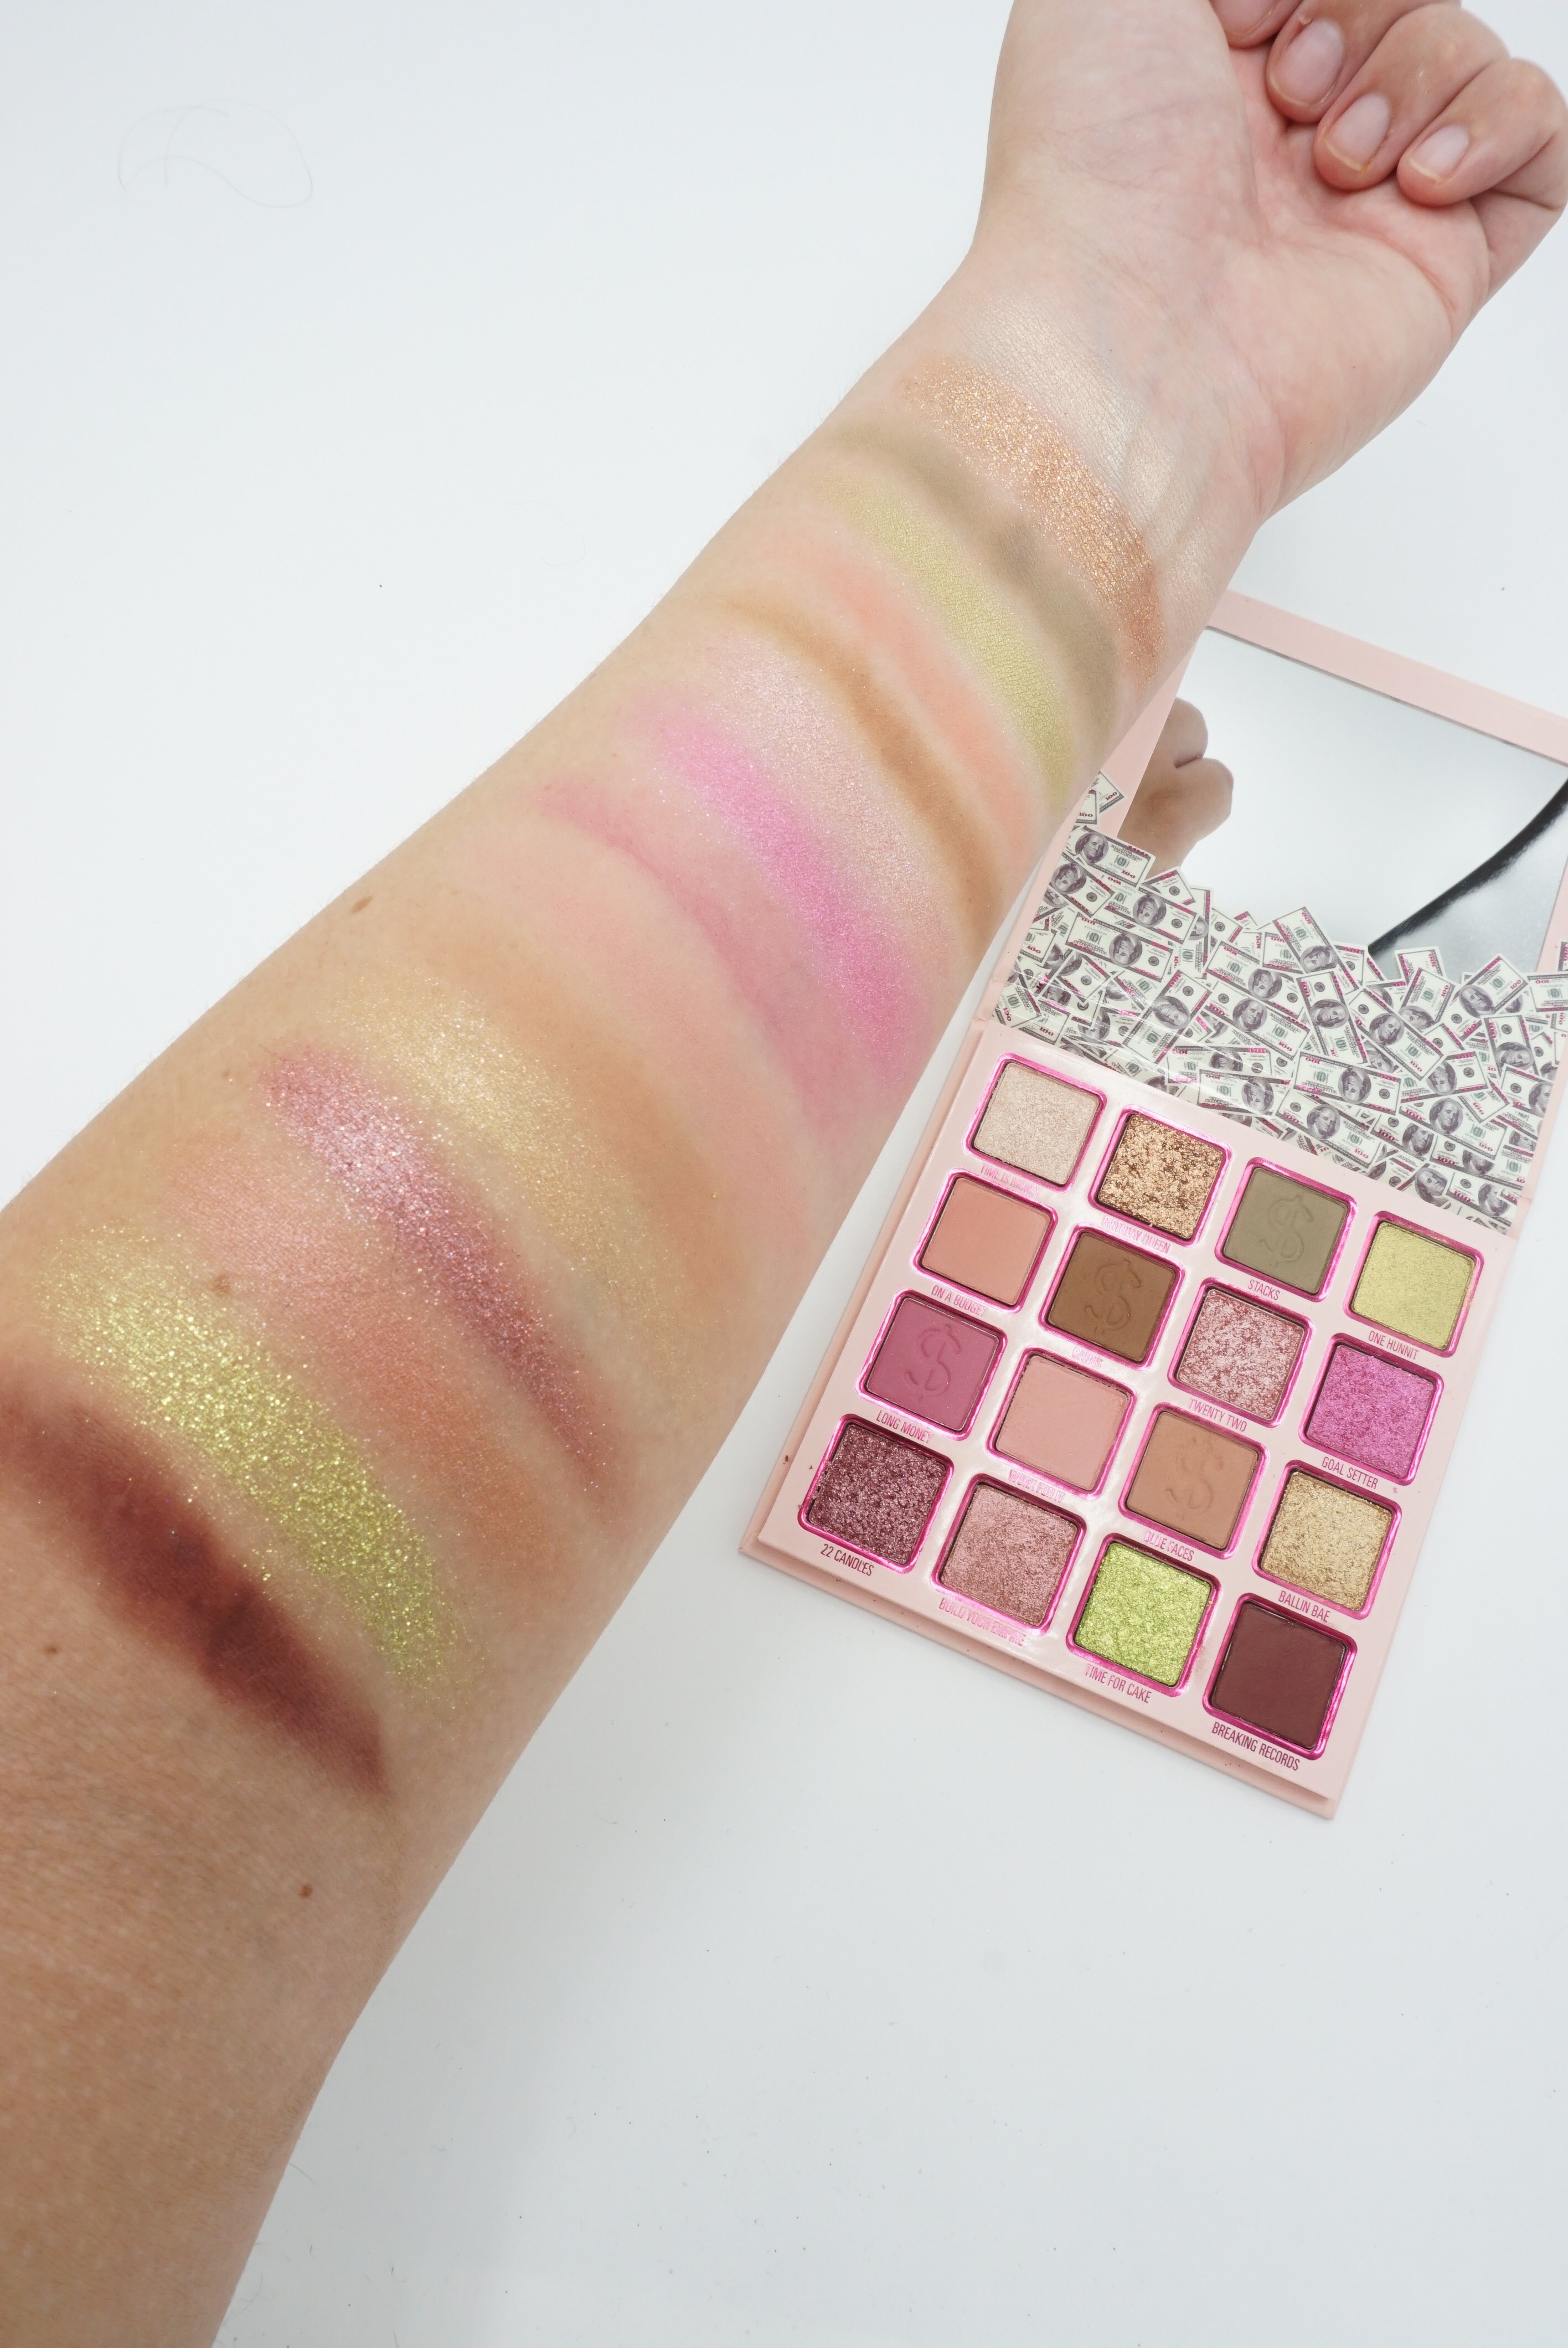 Kylie Cosmetics Birthday Collection 2019 | You're So Money Baby Palette Swatches & Review